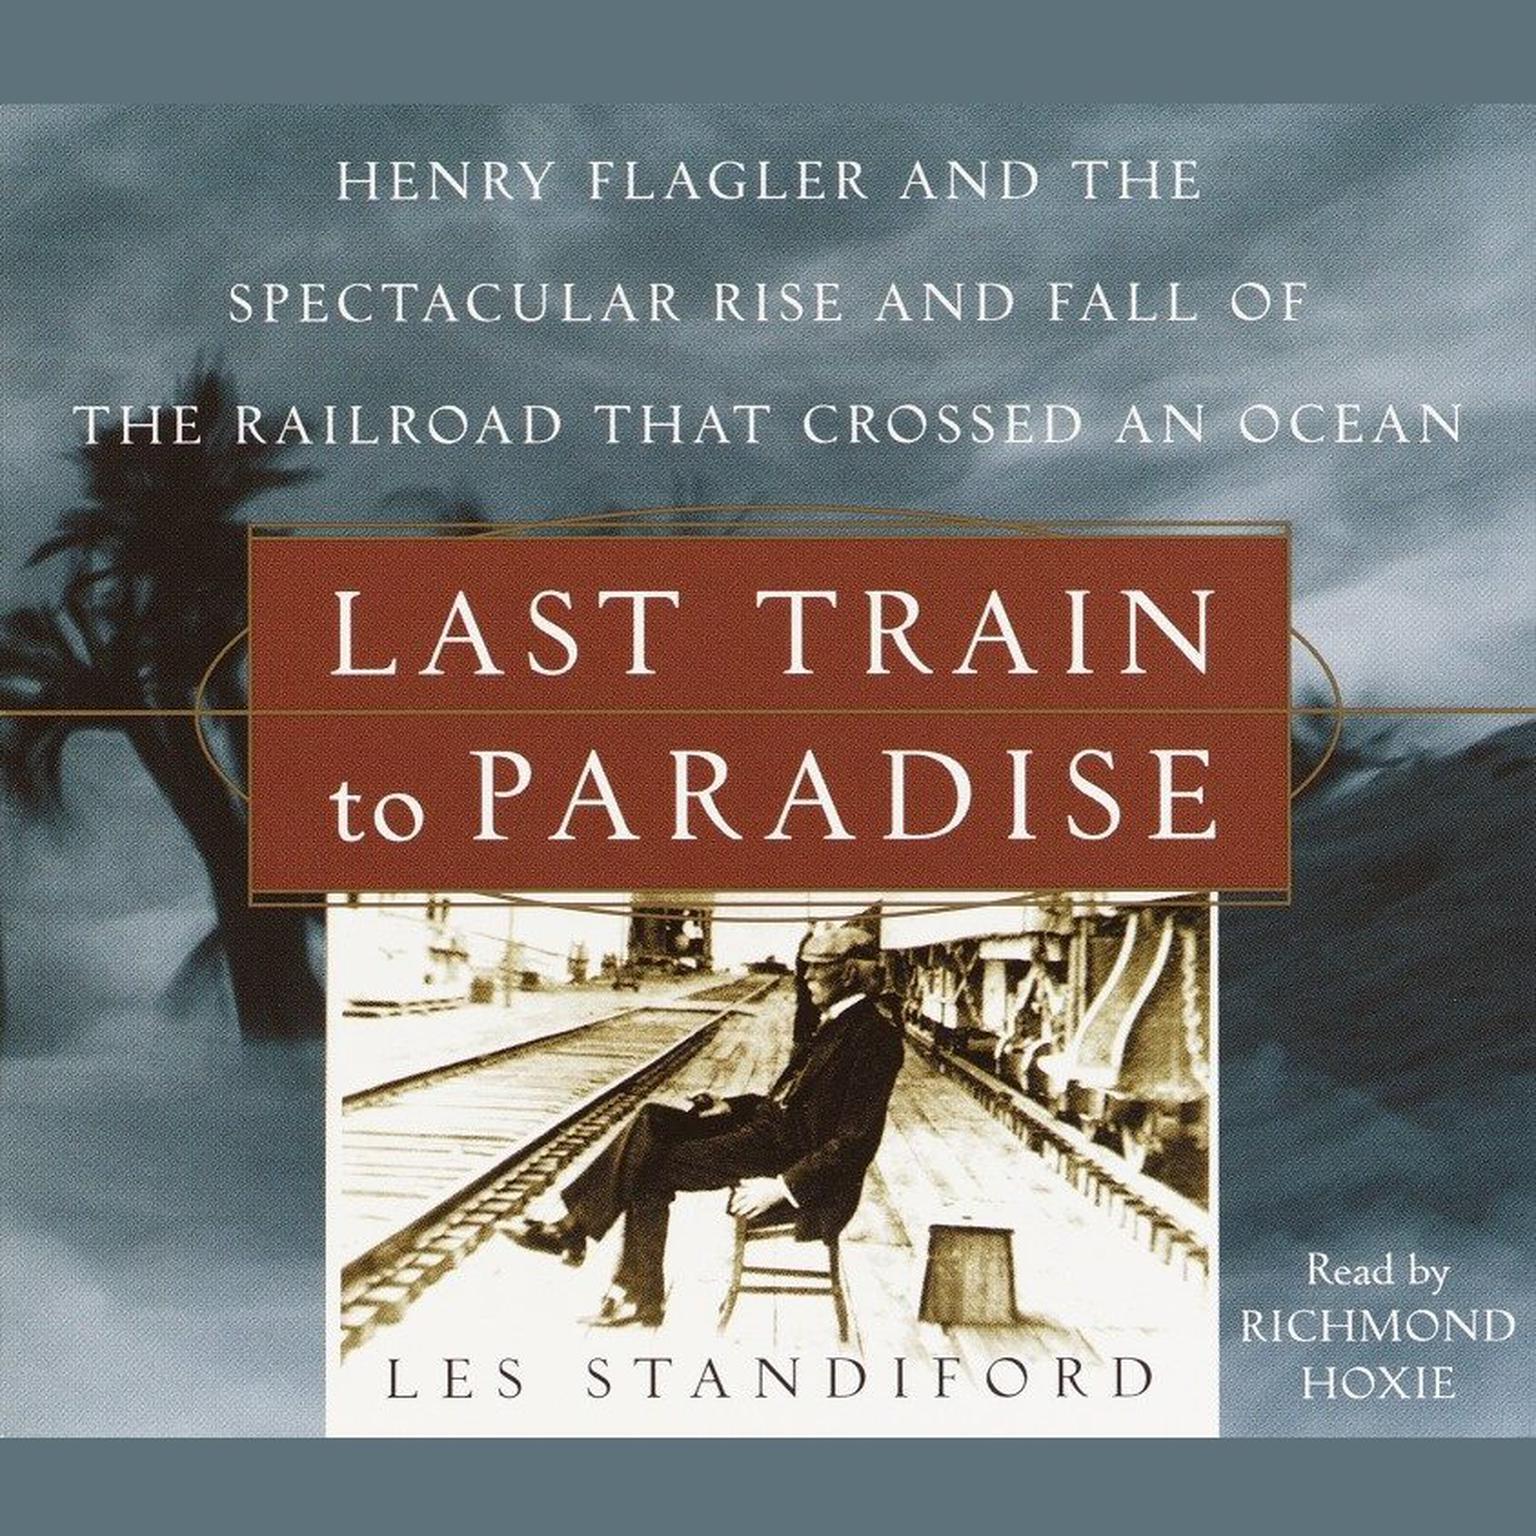 Last Train to Paradise: Henry Flagler and the Spectacular Rise and Fall of the Railroad that Crossed an Ocean Audiobook, by Les Standiford